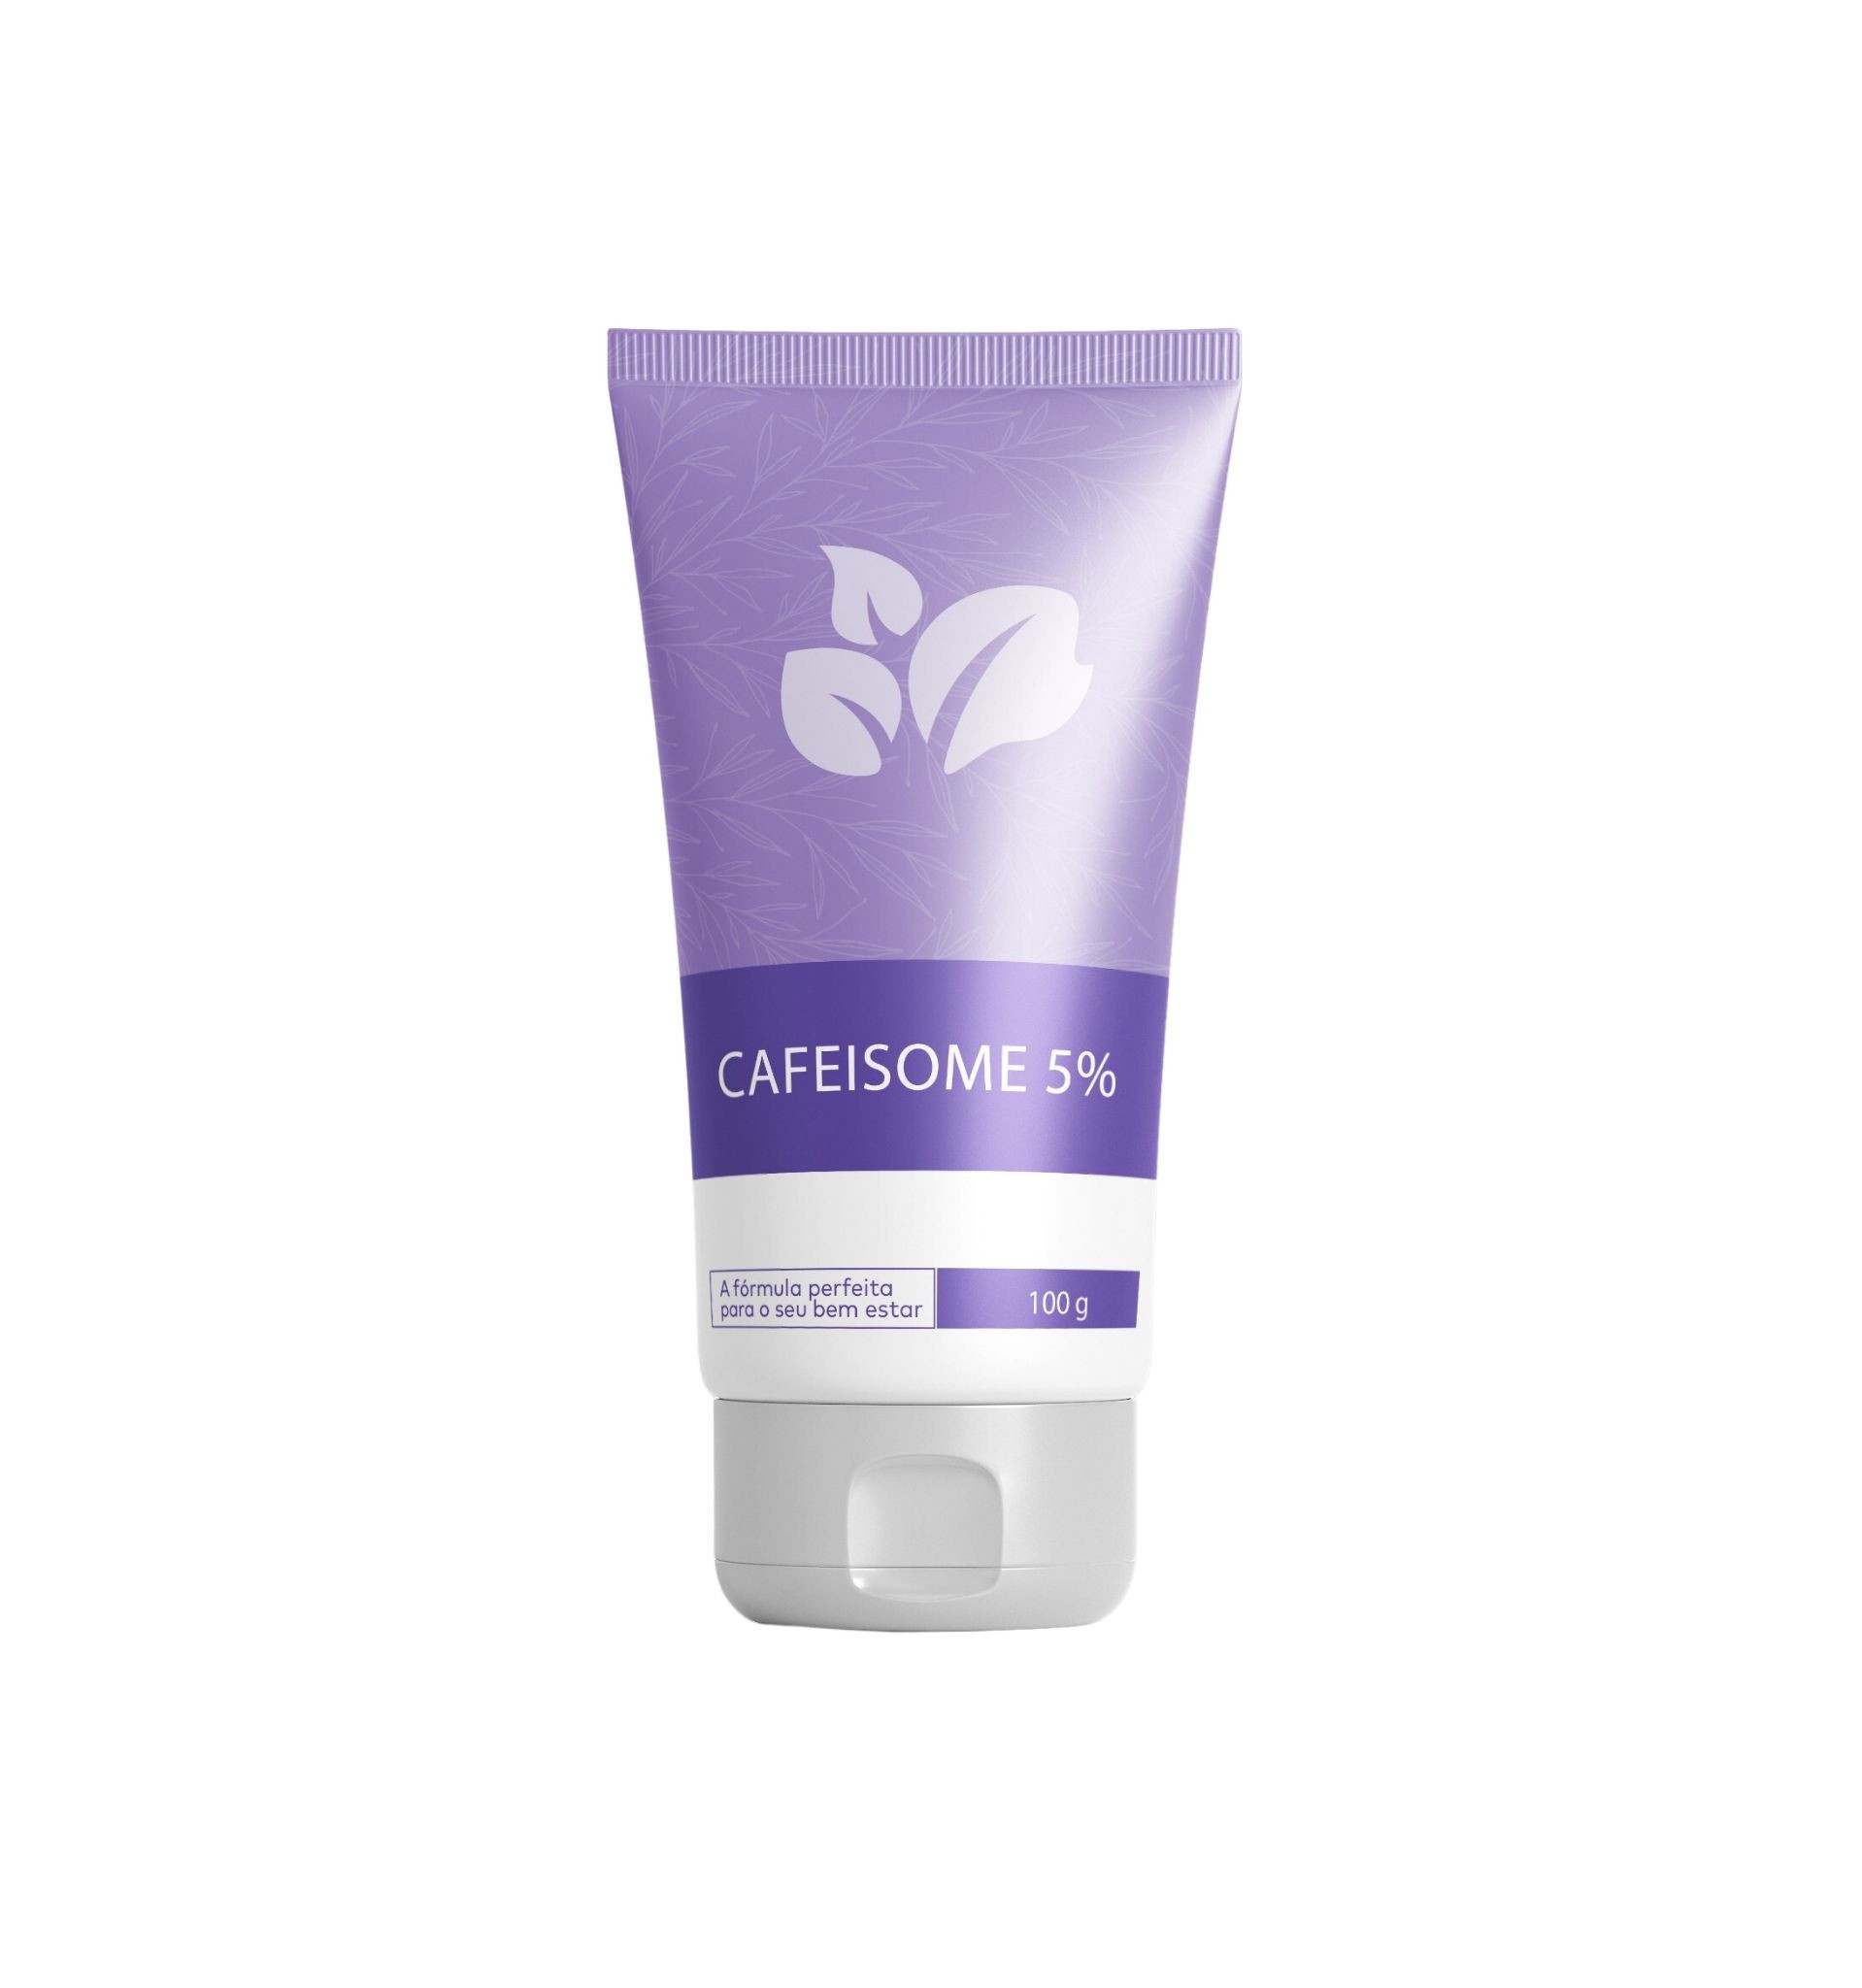 CafeiSome 5% - Creme 100g